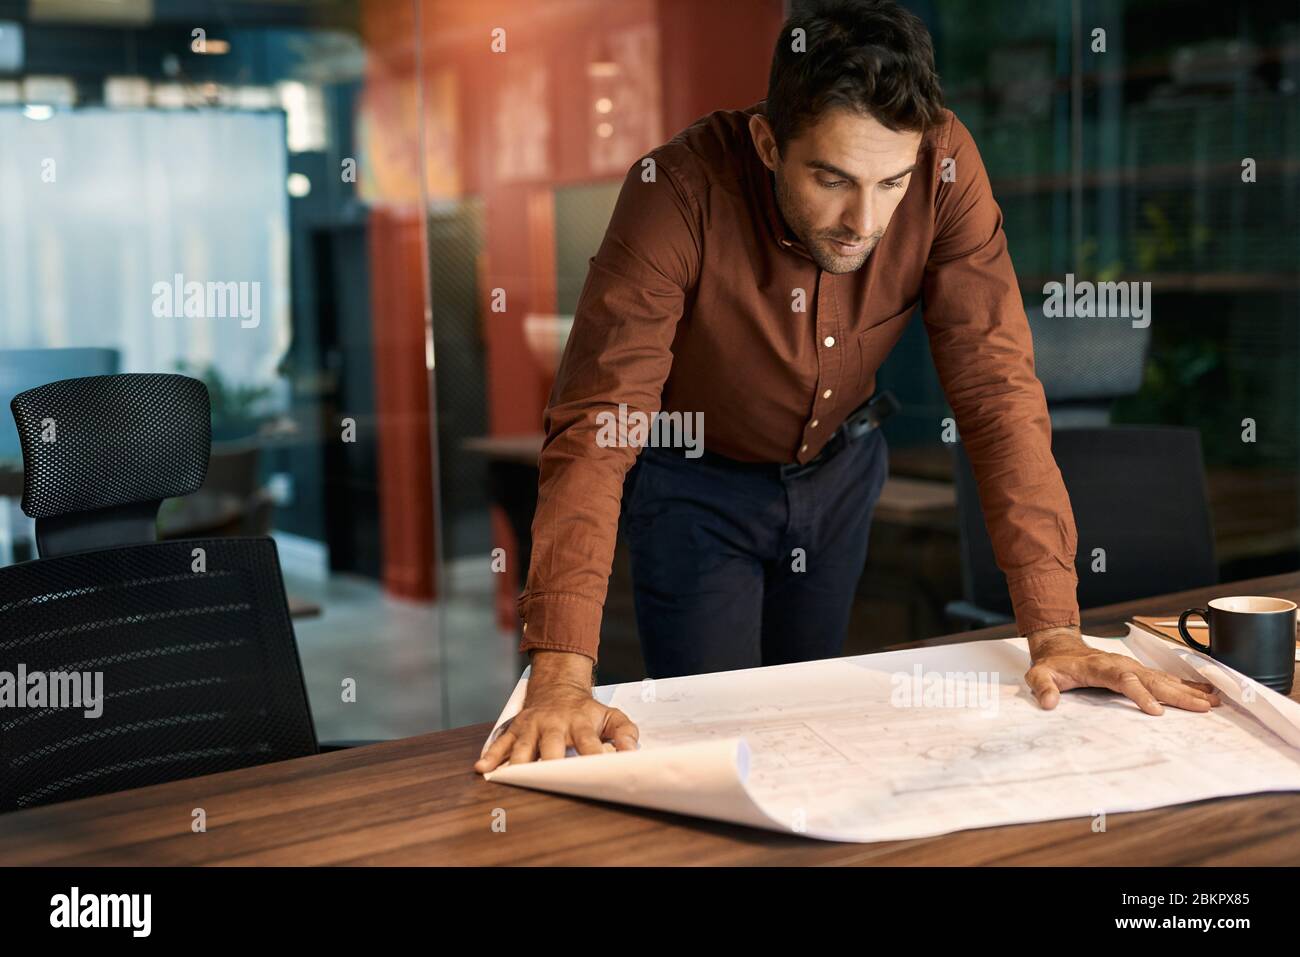 Architect leaning over an office table and reading blueprints Stock Photo